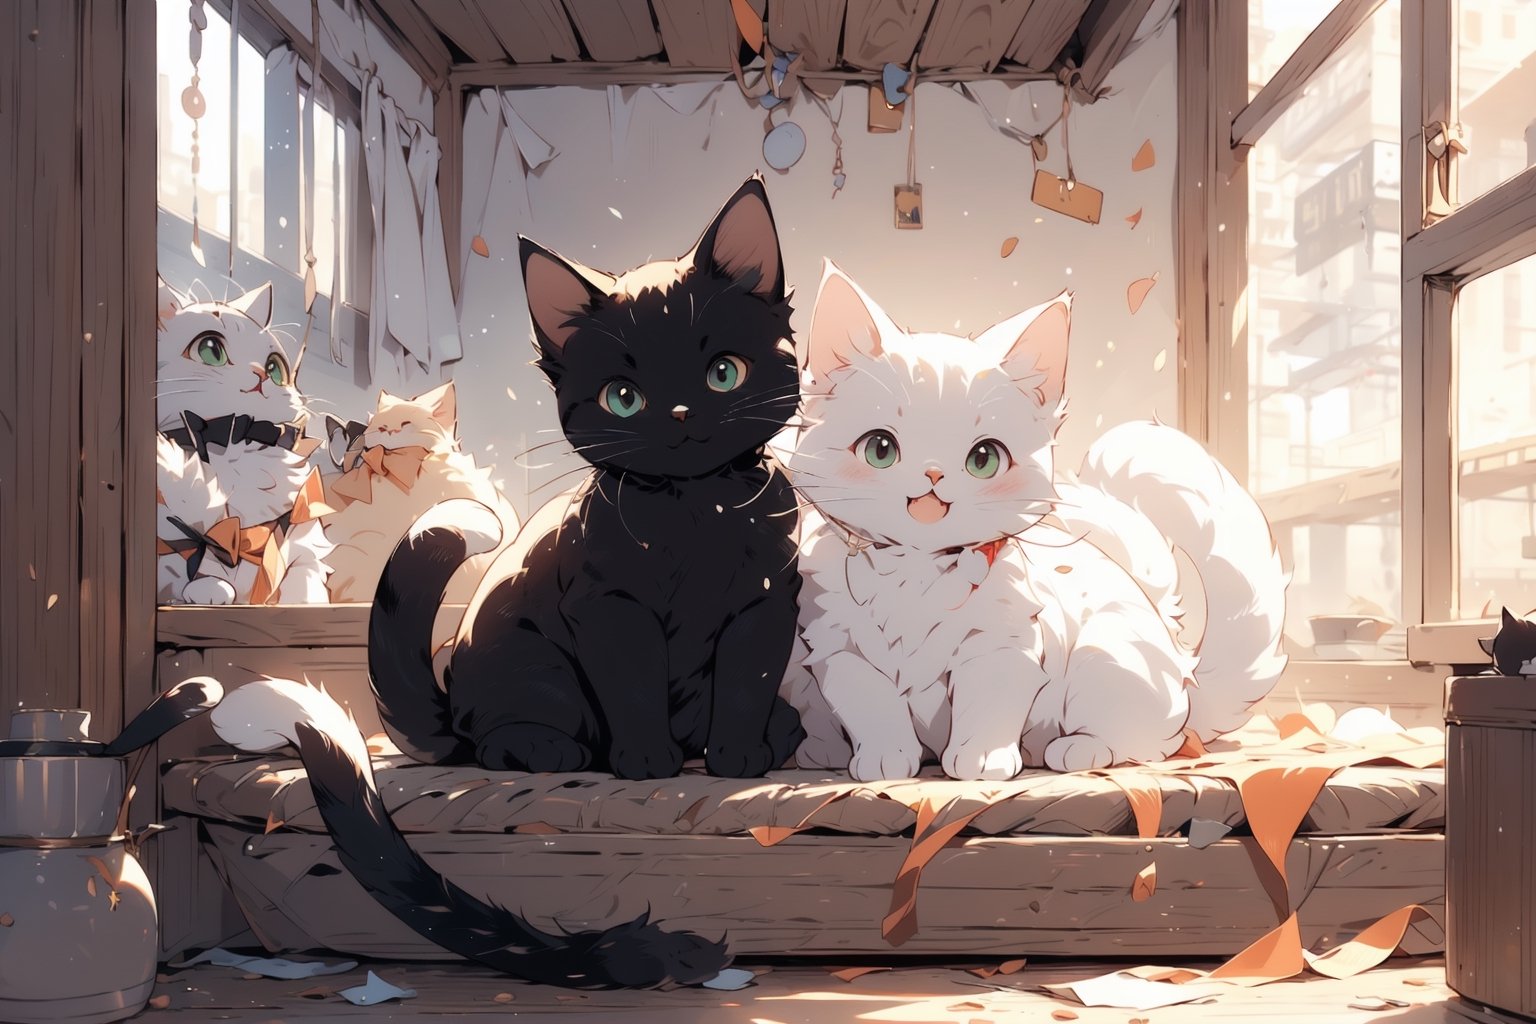 In the sunny spot by the window, two adorable cats peacefully doze side by side. One is a sleek black cat, curled up elegantly with its tail wrapped around its body. The other is a fluffy white cat, stretched out luxuriously, its soft fur glowing in the warm sunlight. Both cats breathe softly, their chests rising and falling rhythmically as they enjoy their afternoon nap together.,best quality